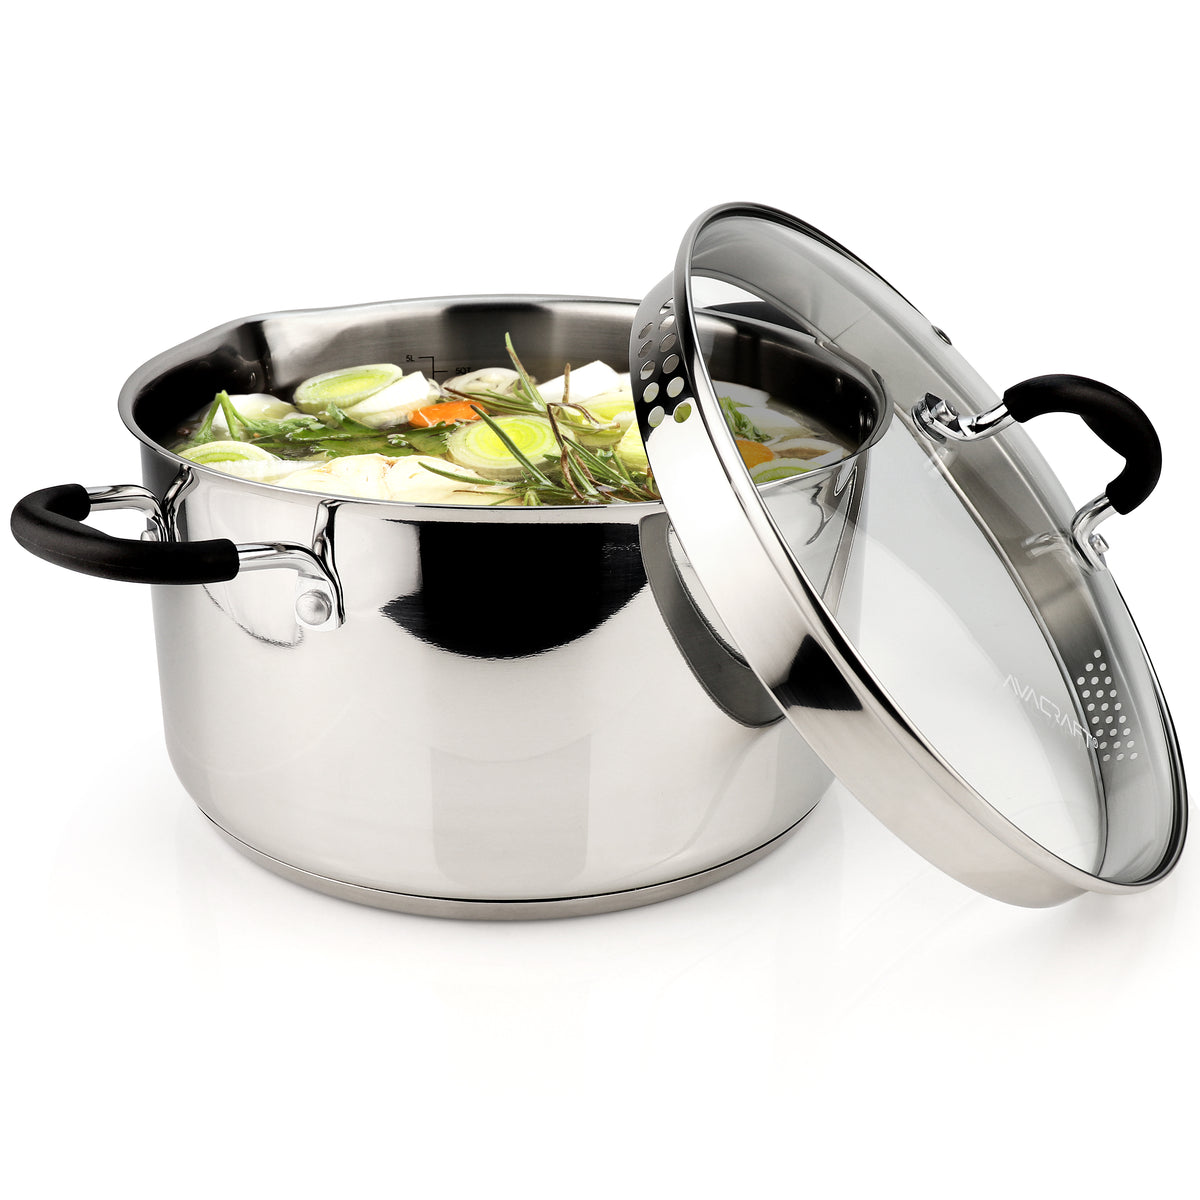 Aava - Elements Stainless Steel Stock Pot with lid – Aavanordic